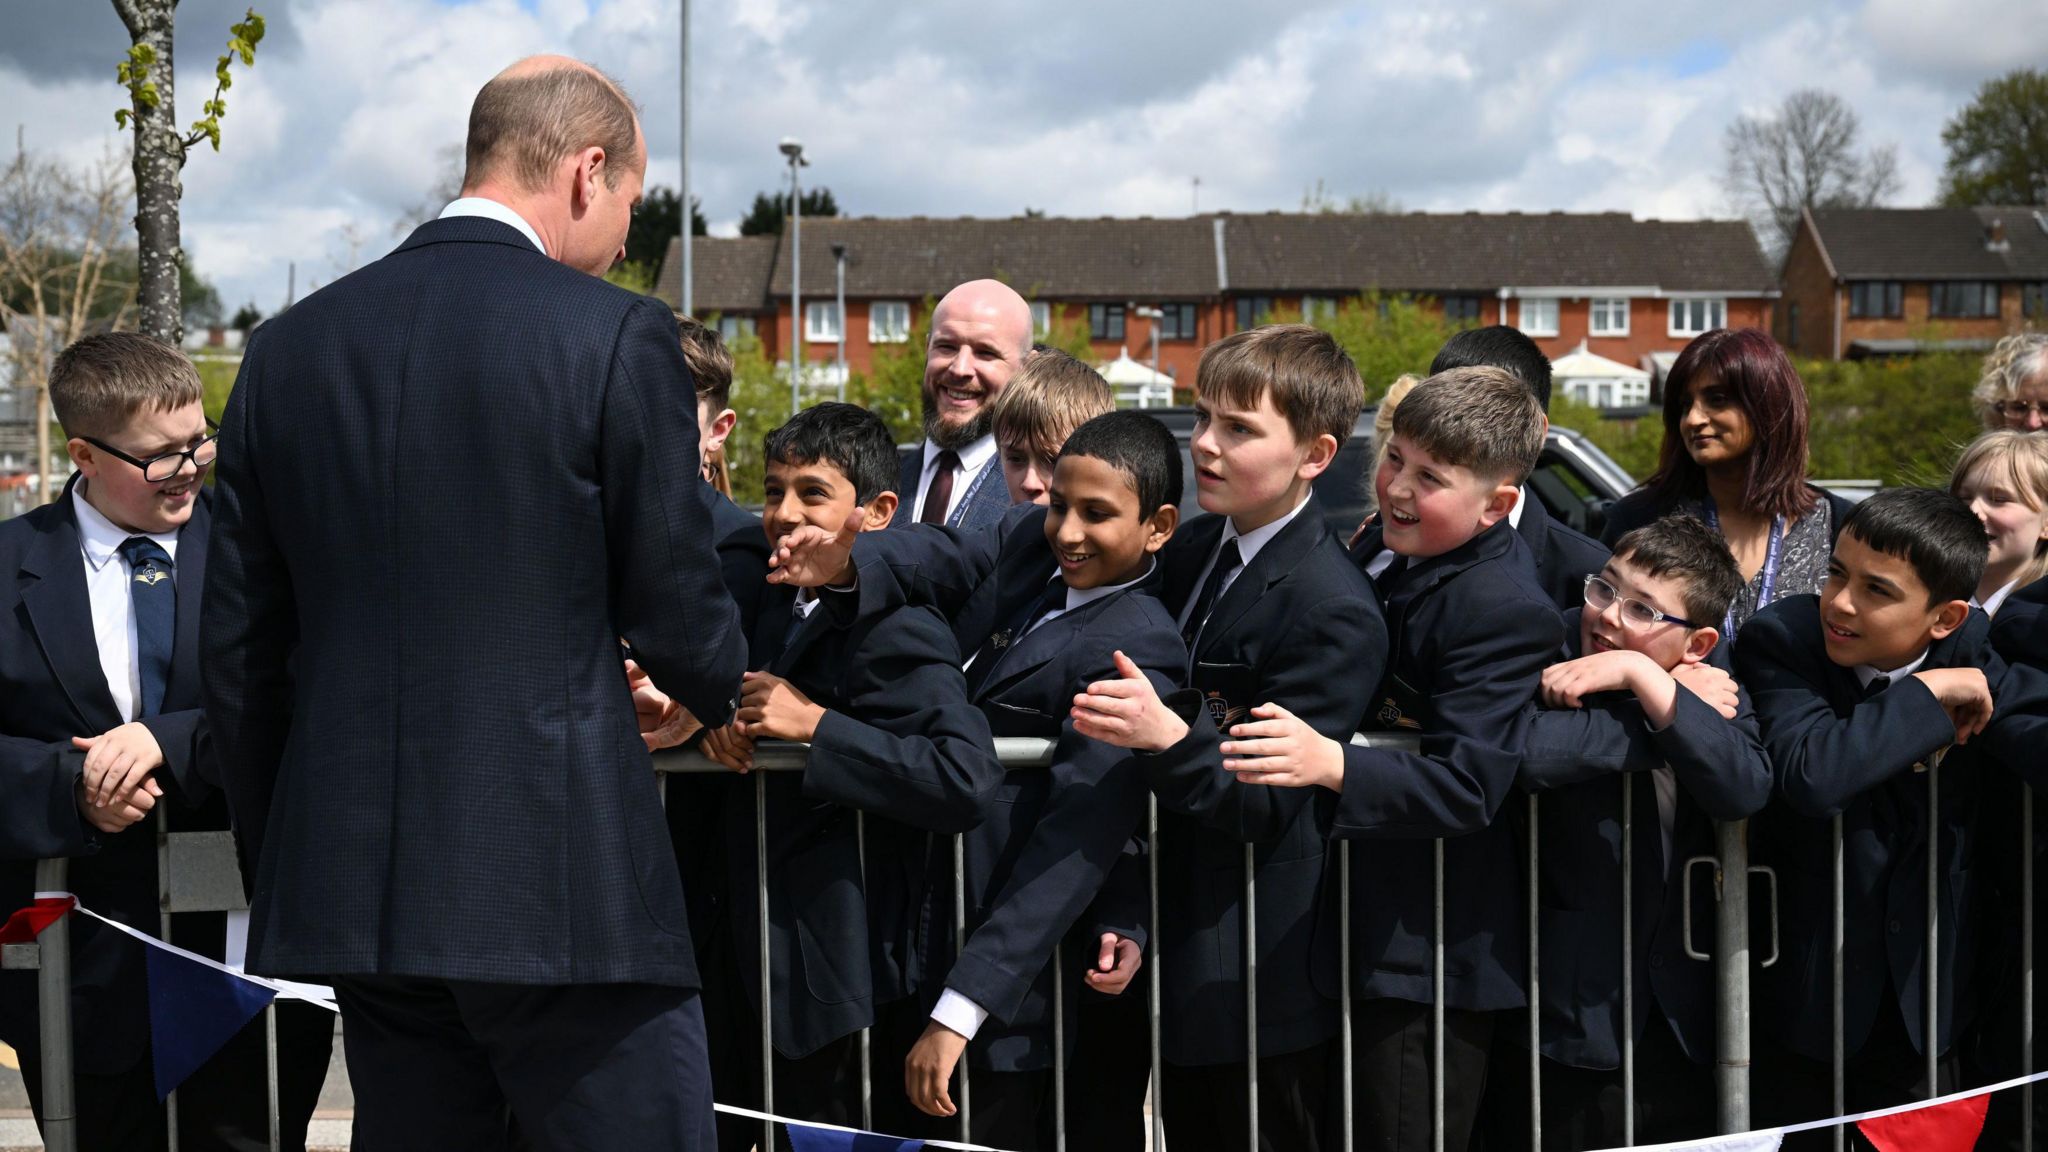 Prince William meeting a group of school pupils